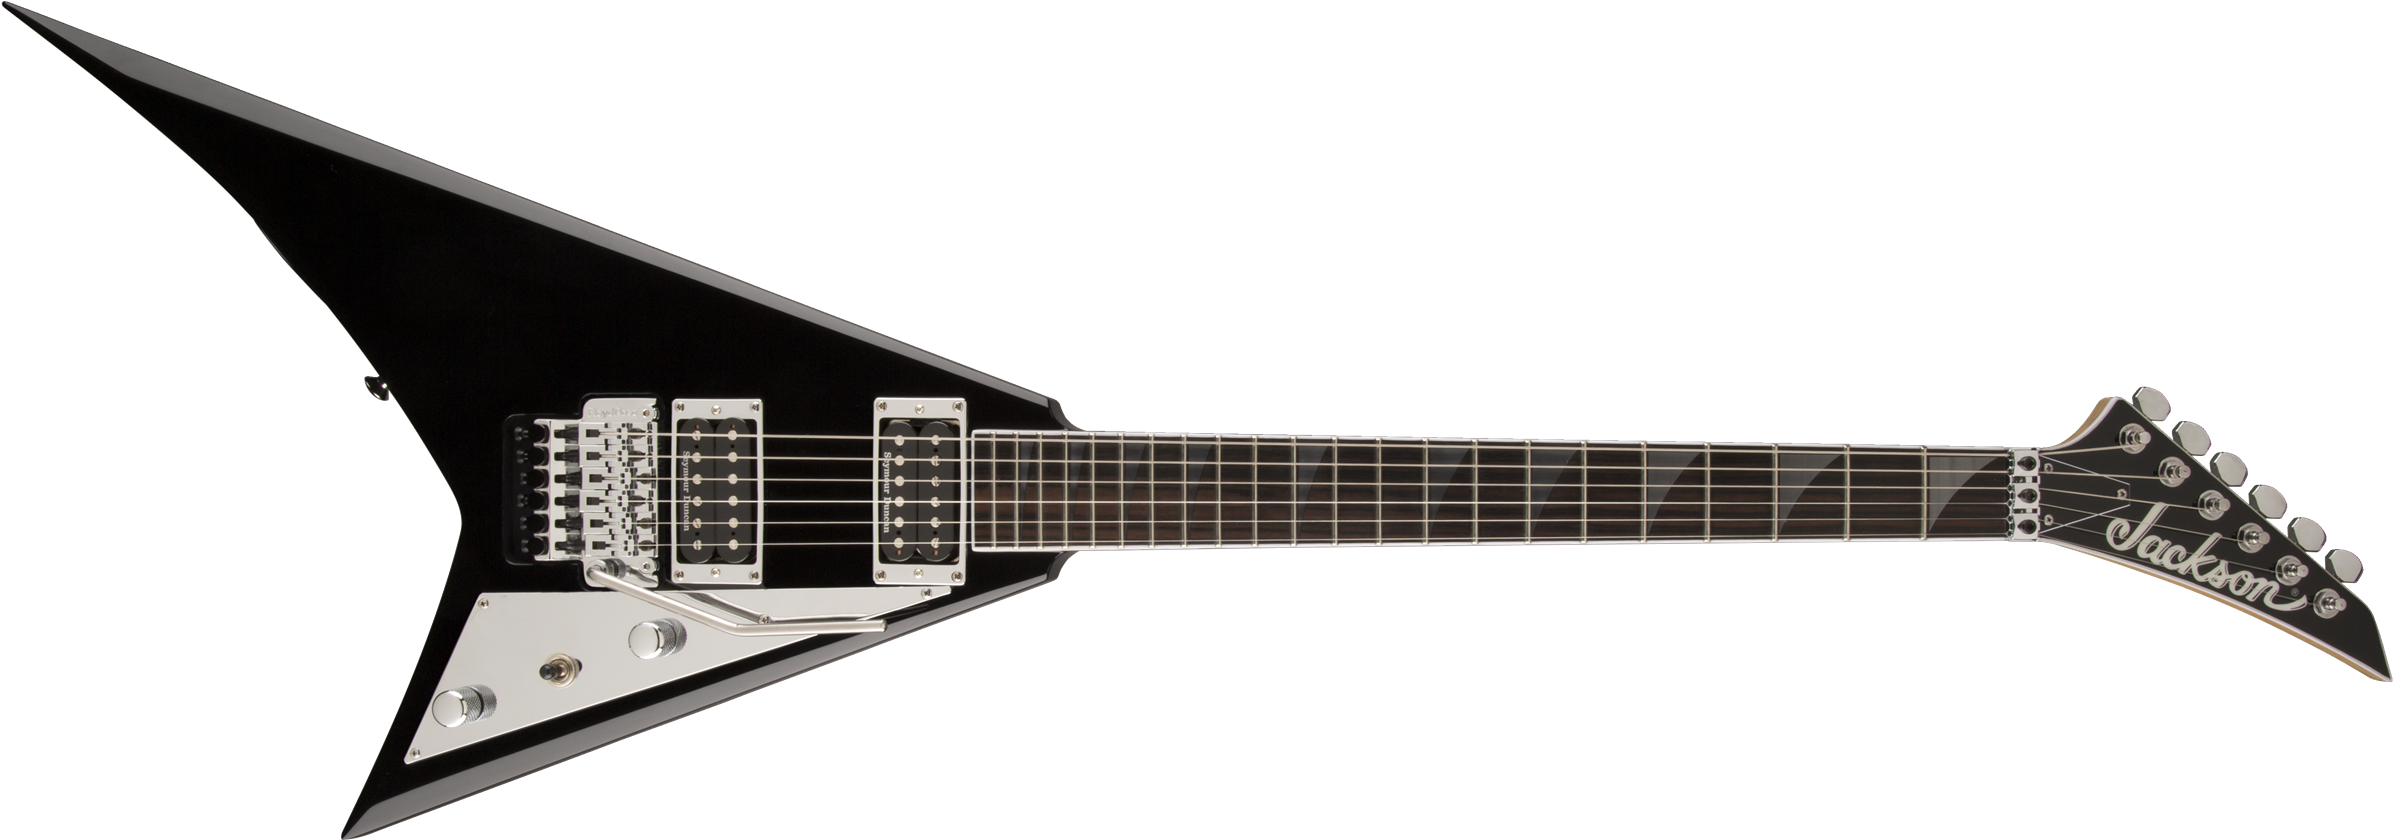 Multi-Neck Guitar PNG HD Quality